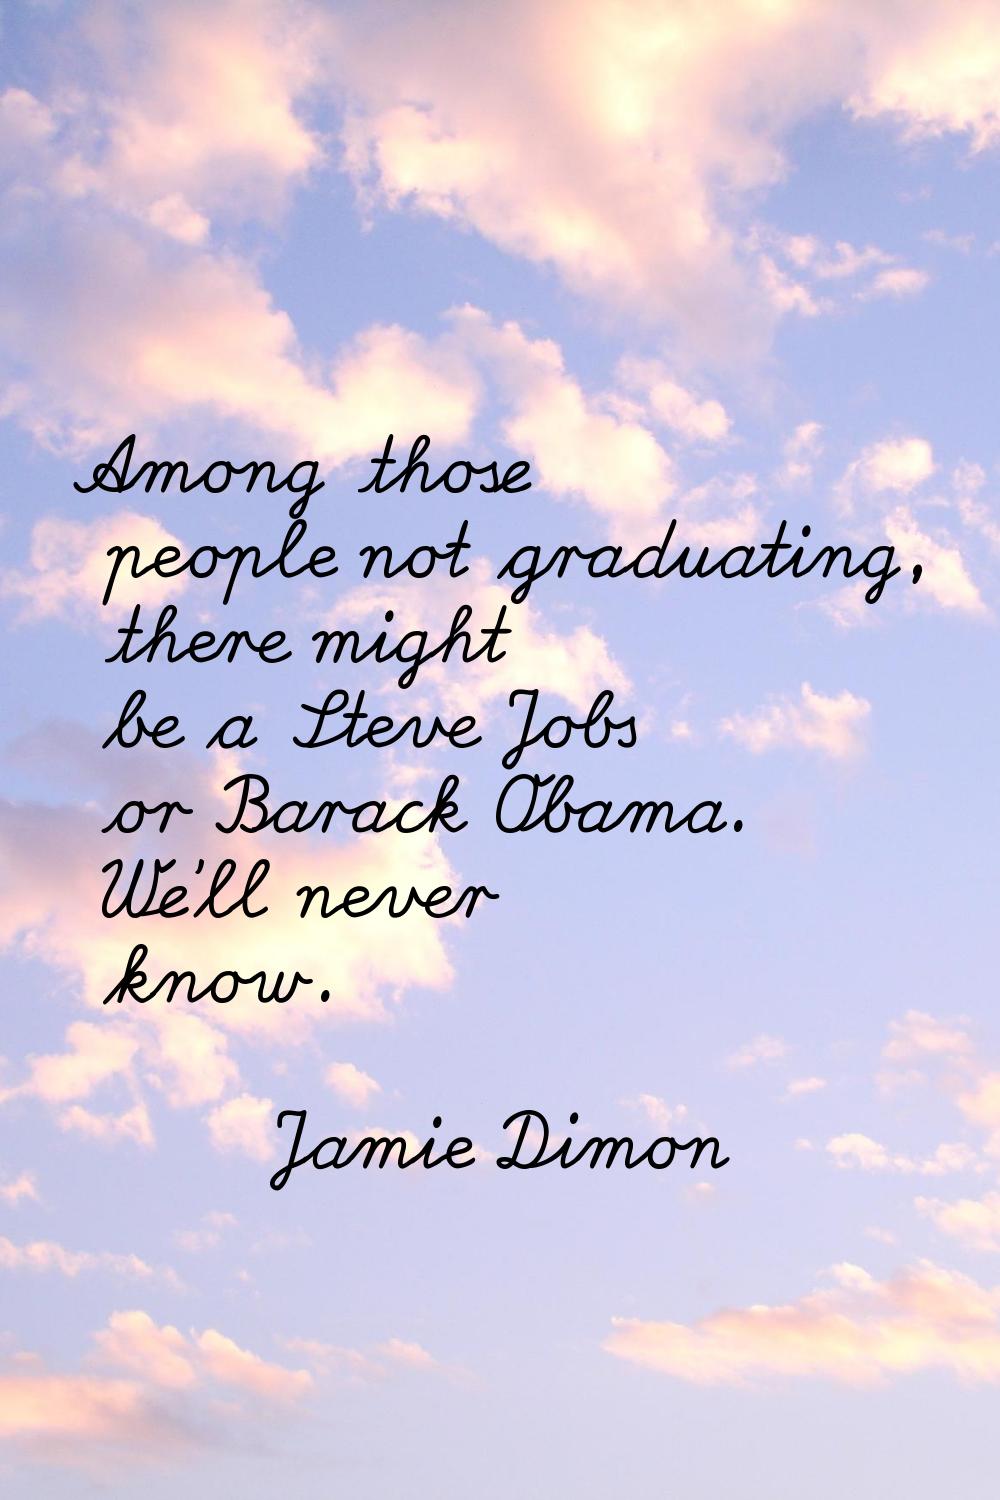 Among those people not graduating, there might be a Steve Jobs or Barack Obama. We'll never know.